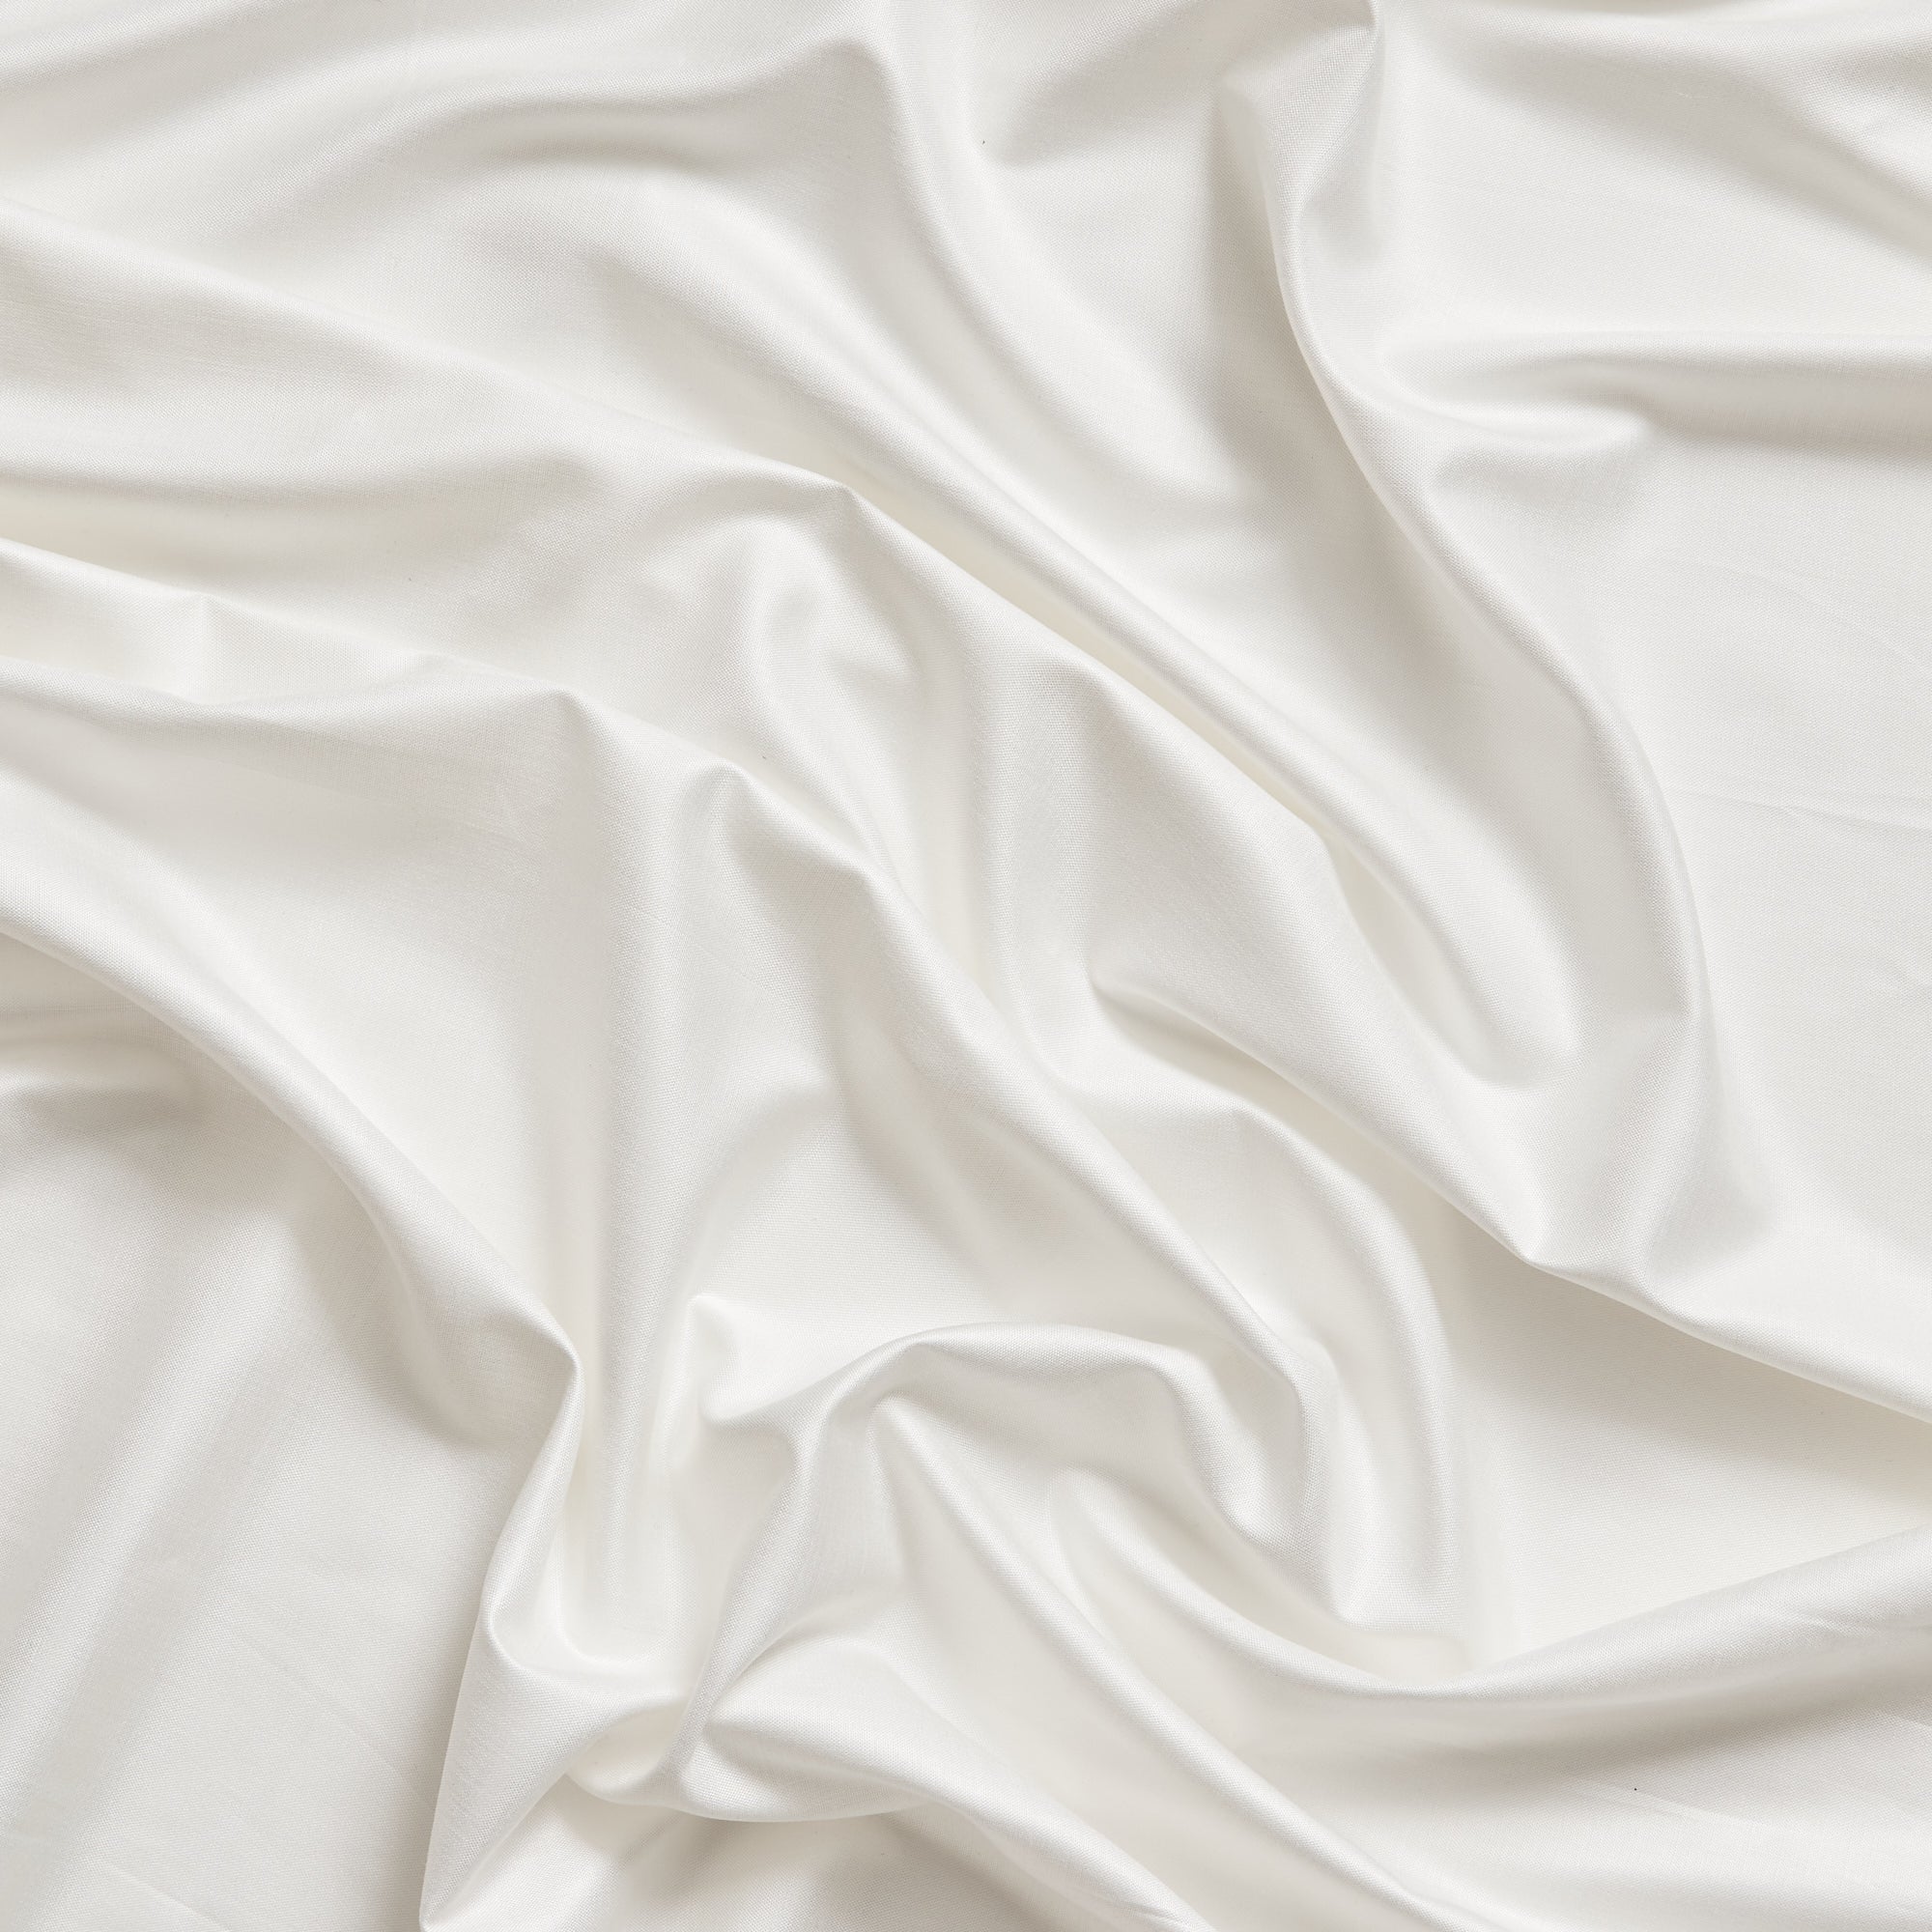 Flex presenting the white color version with a smooth wet leather look stretch viscose blended with spandex and featuring excellent drape